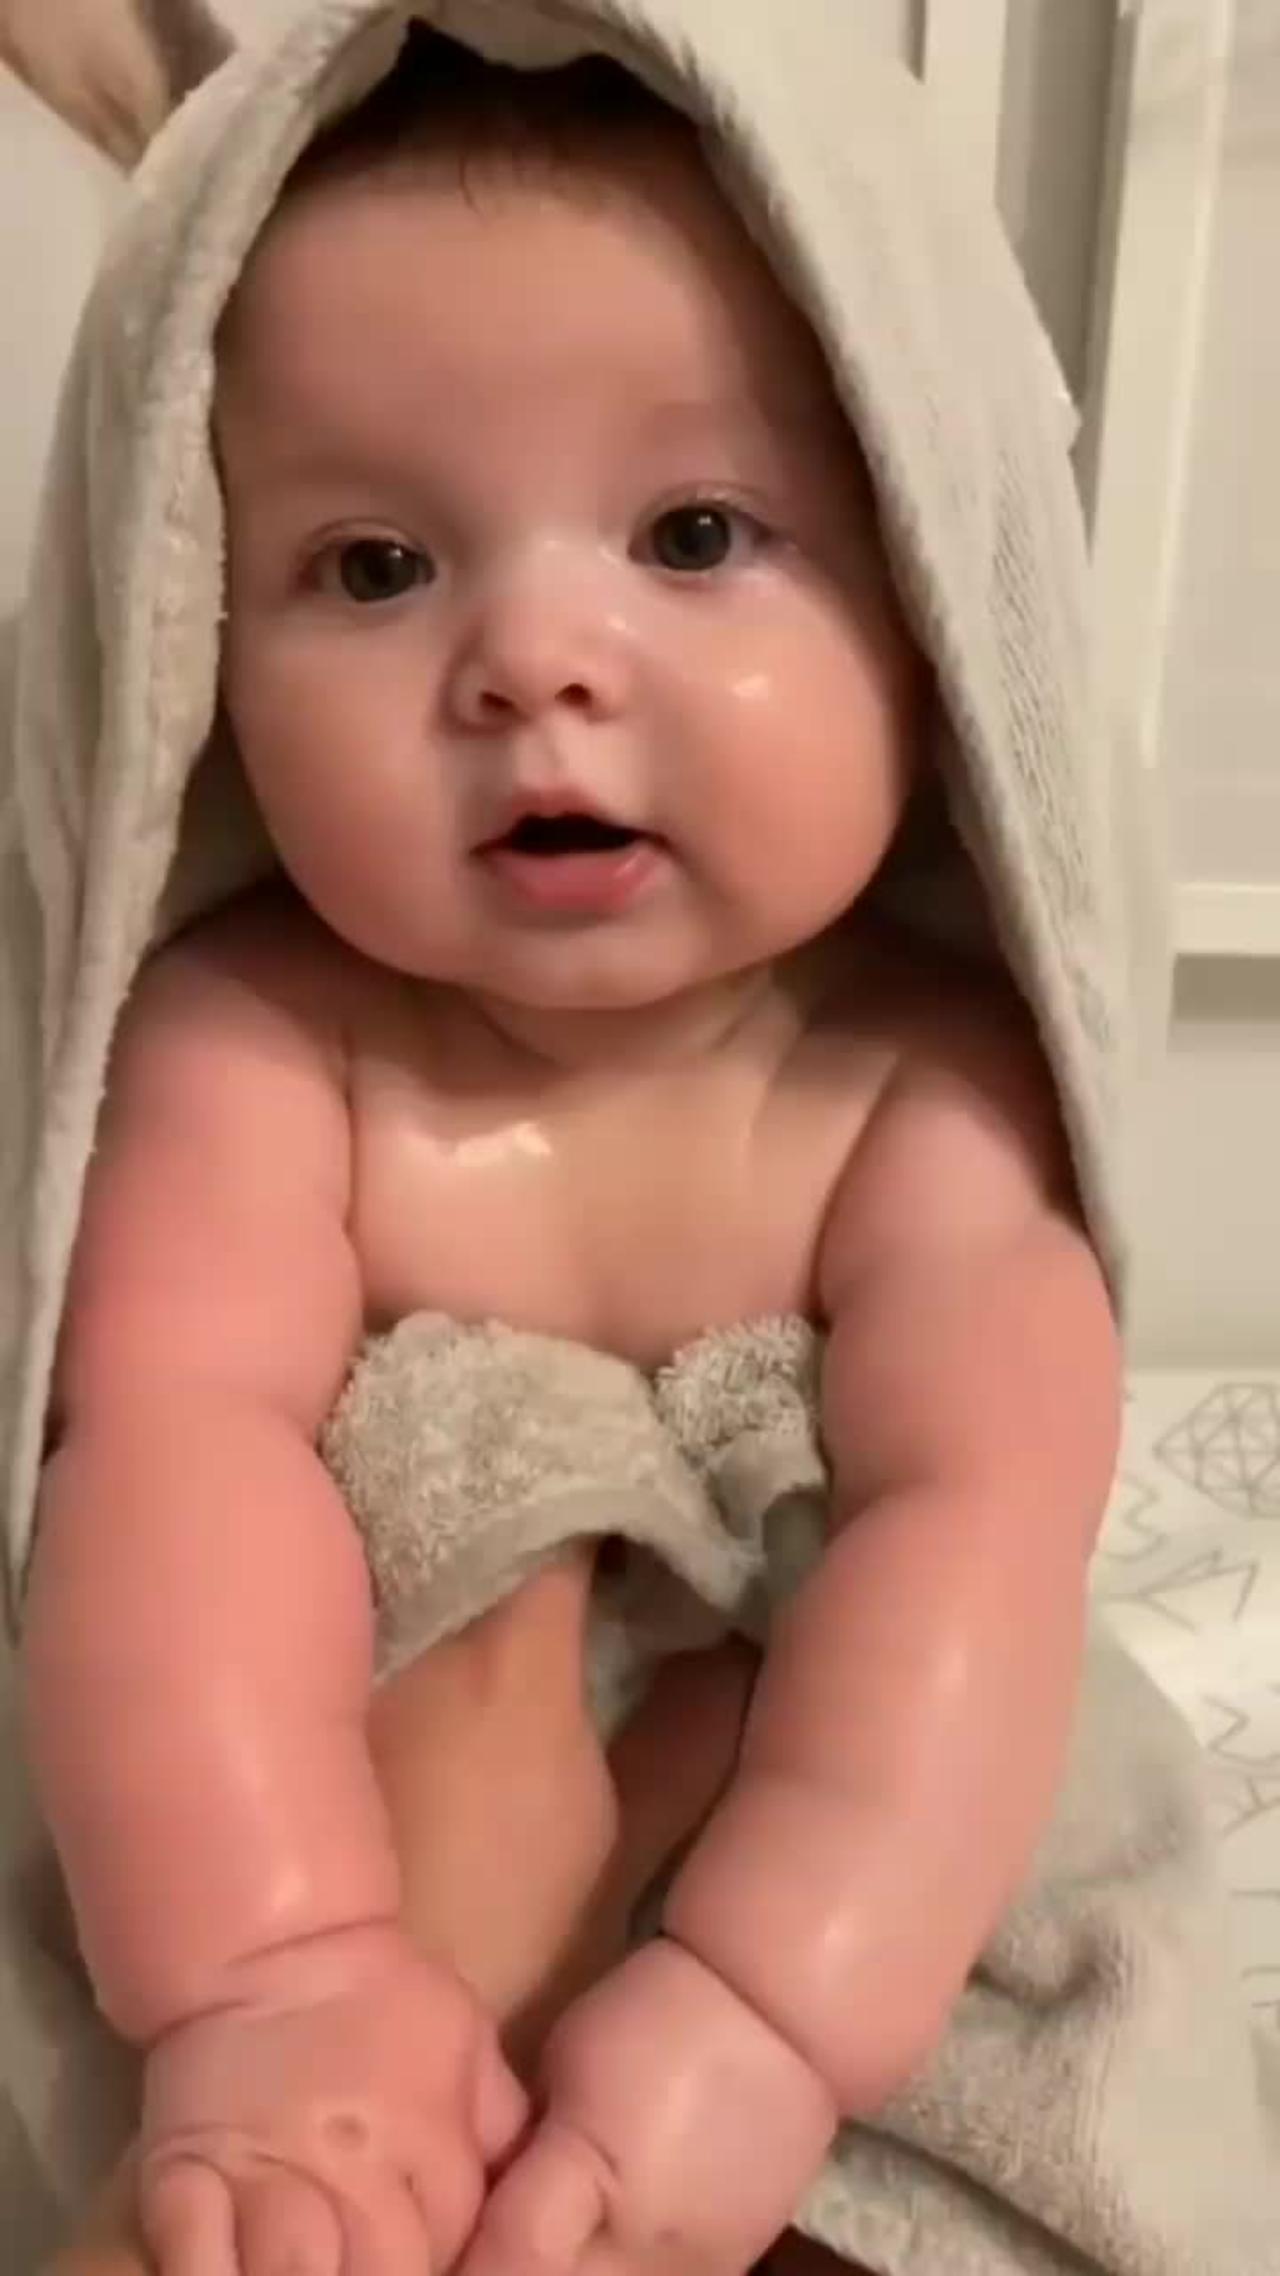 Cute chubby baby - Funny videos